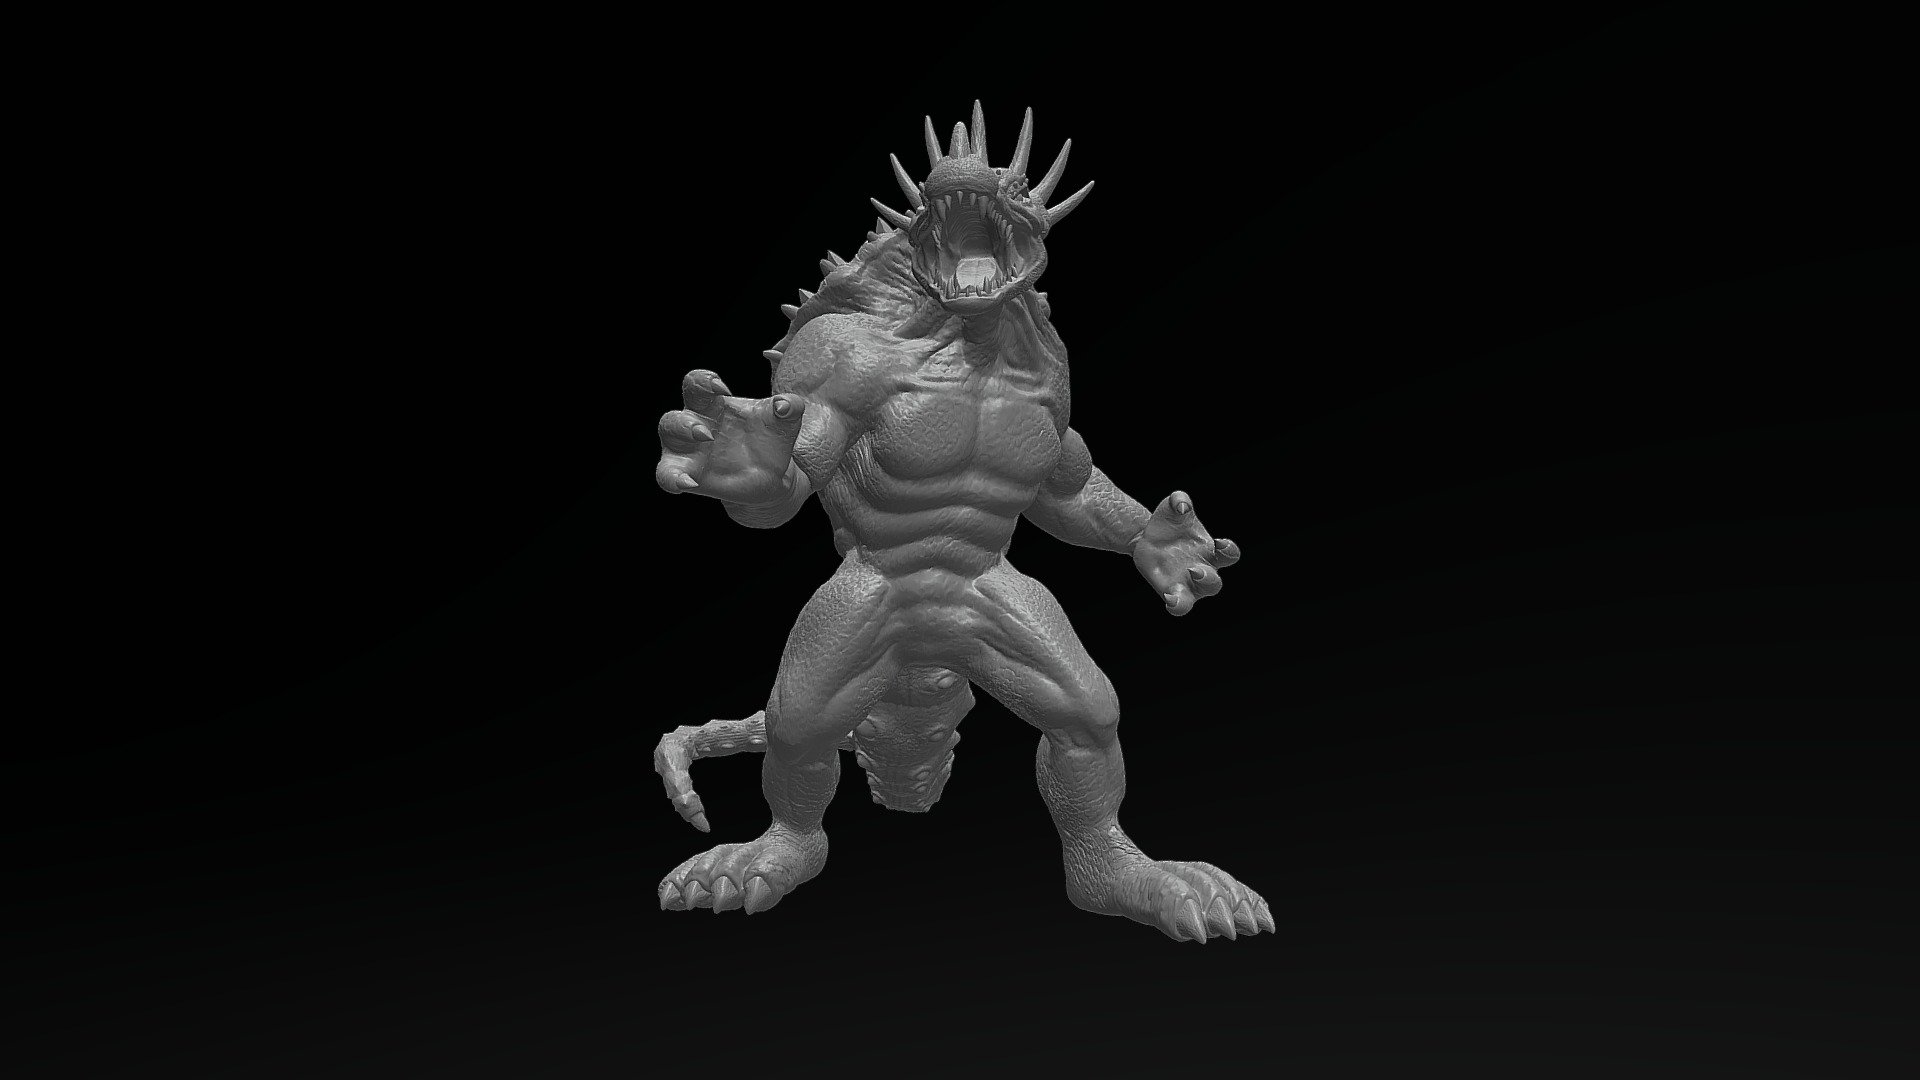 I was commissioned to reproduce an old Trendmasters Anguirus figure. This particular model was based on a rejected prototype of an Anguirus with a half back shell. The original sculptor quite liked the design, so this model is a gift to him I'm told 3d model